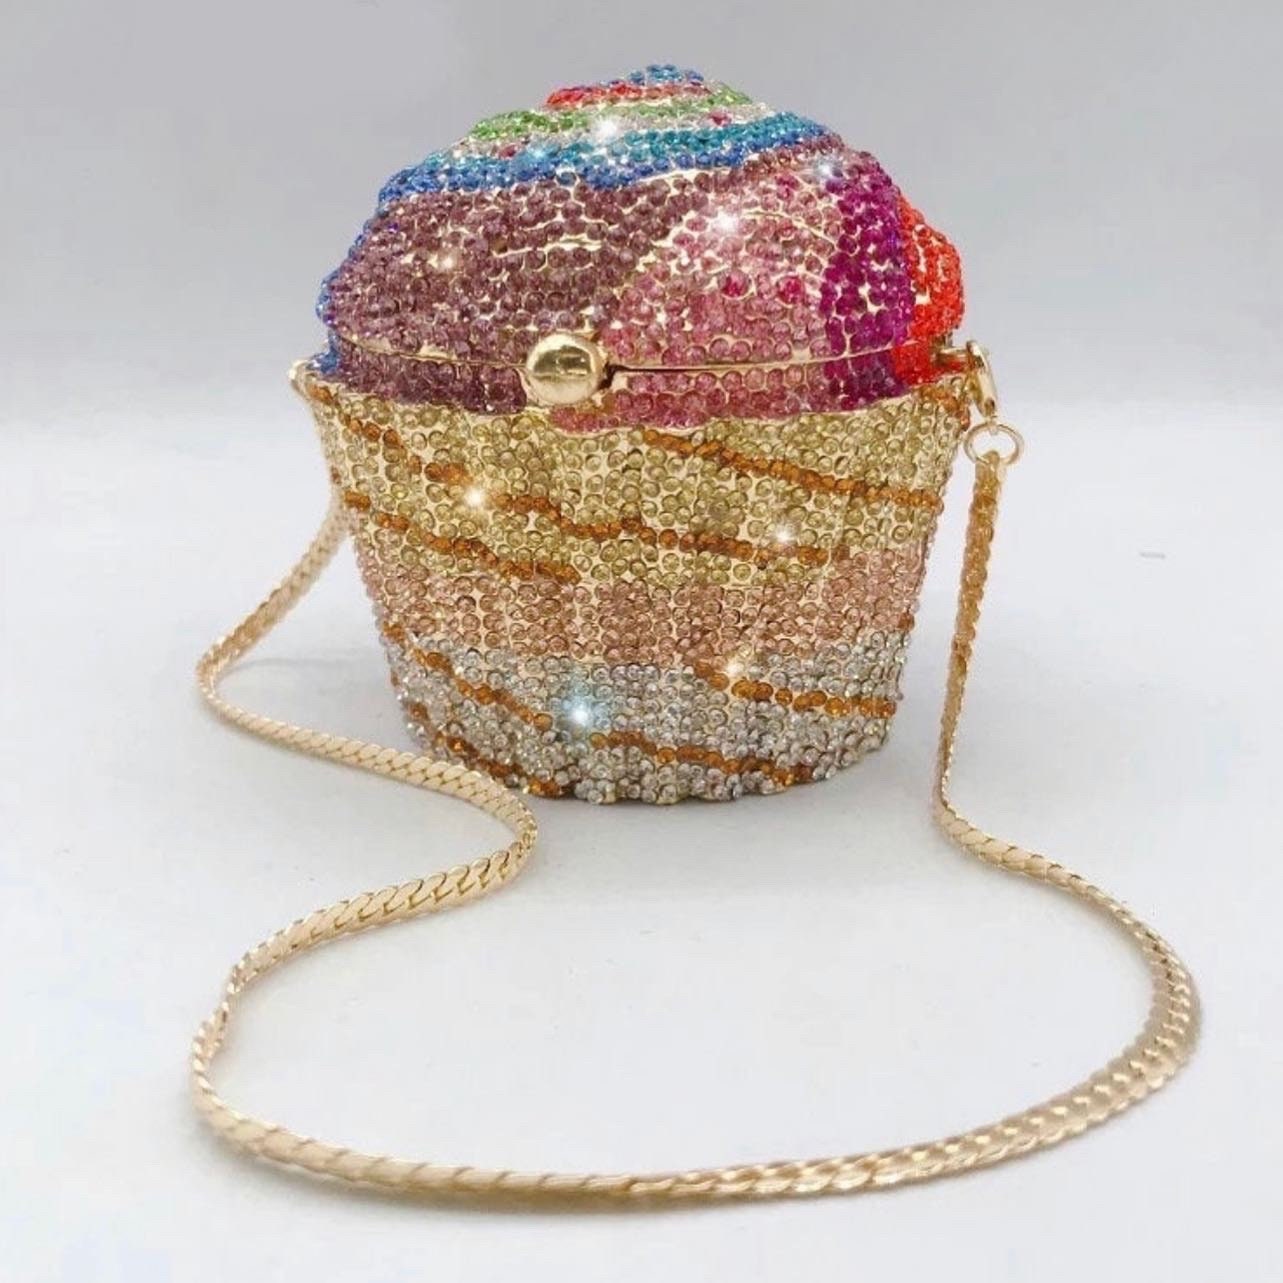 Crystal Clutch Purses Exporter in India ,Crystal Clutch Purses Manufacturer  from Jaipur